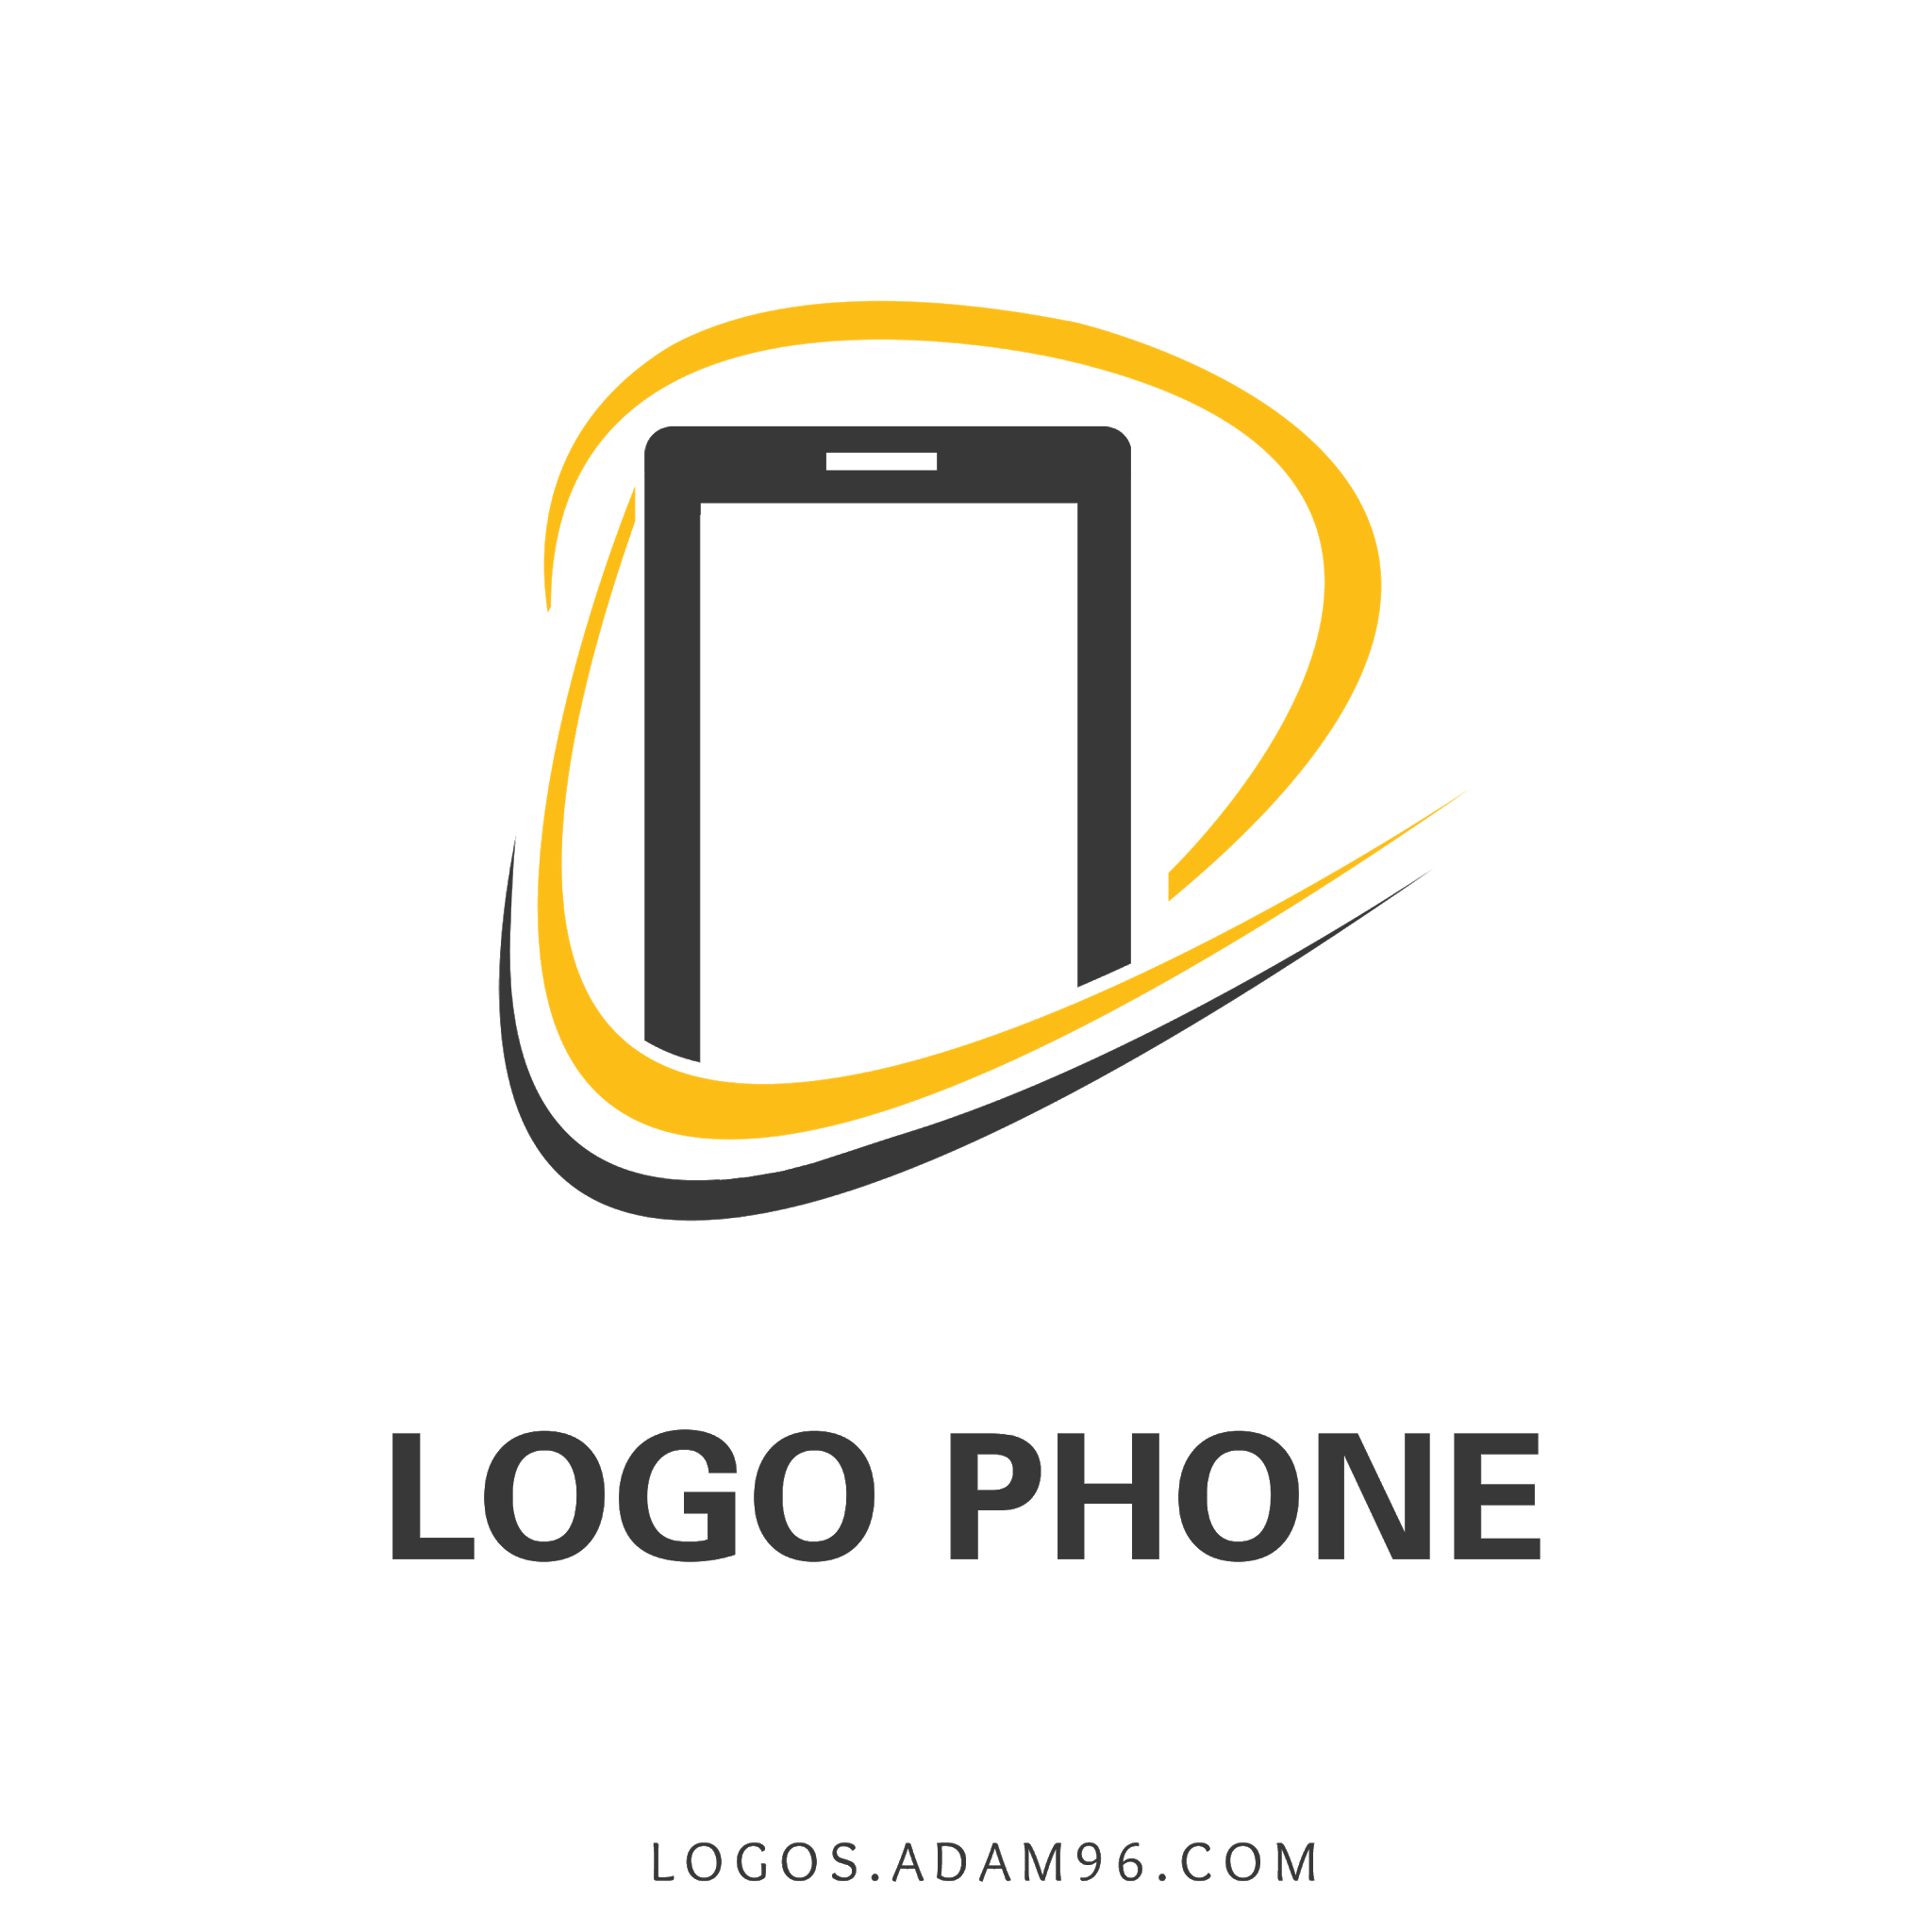 Phone Logo PSD For Free Download Without Rights